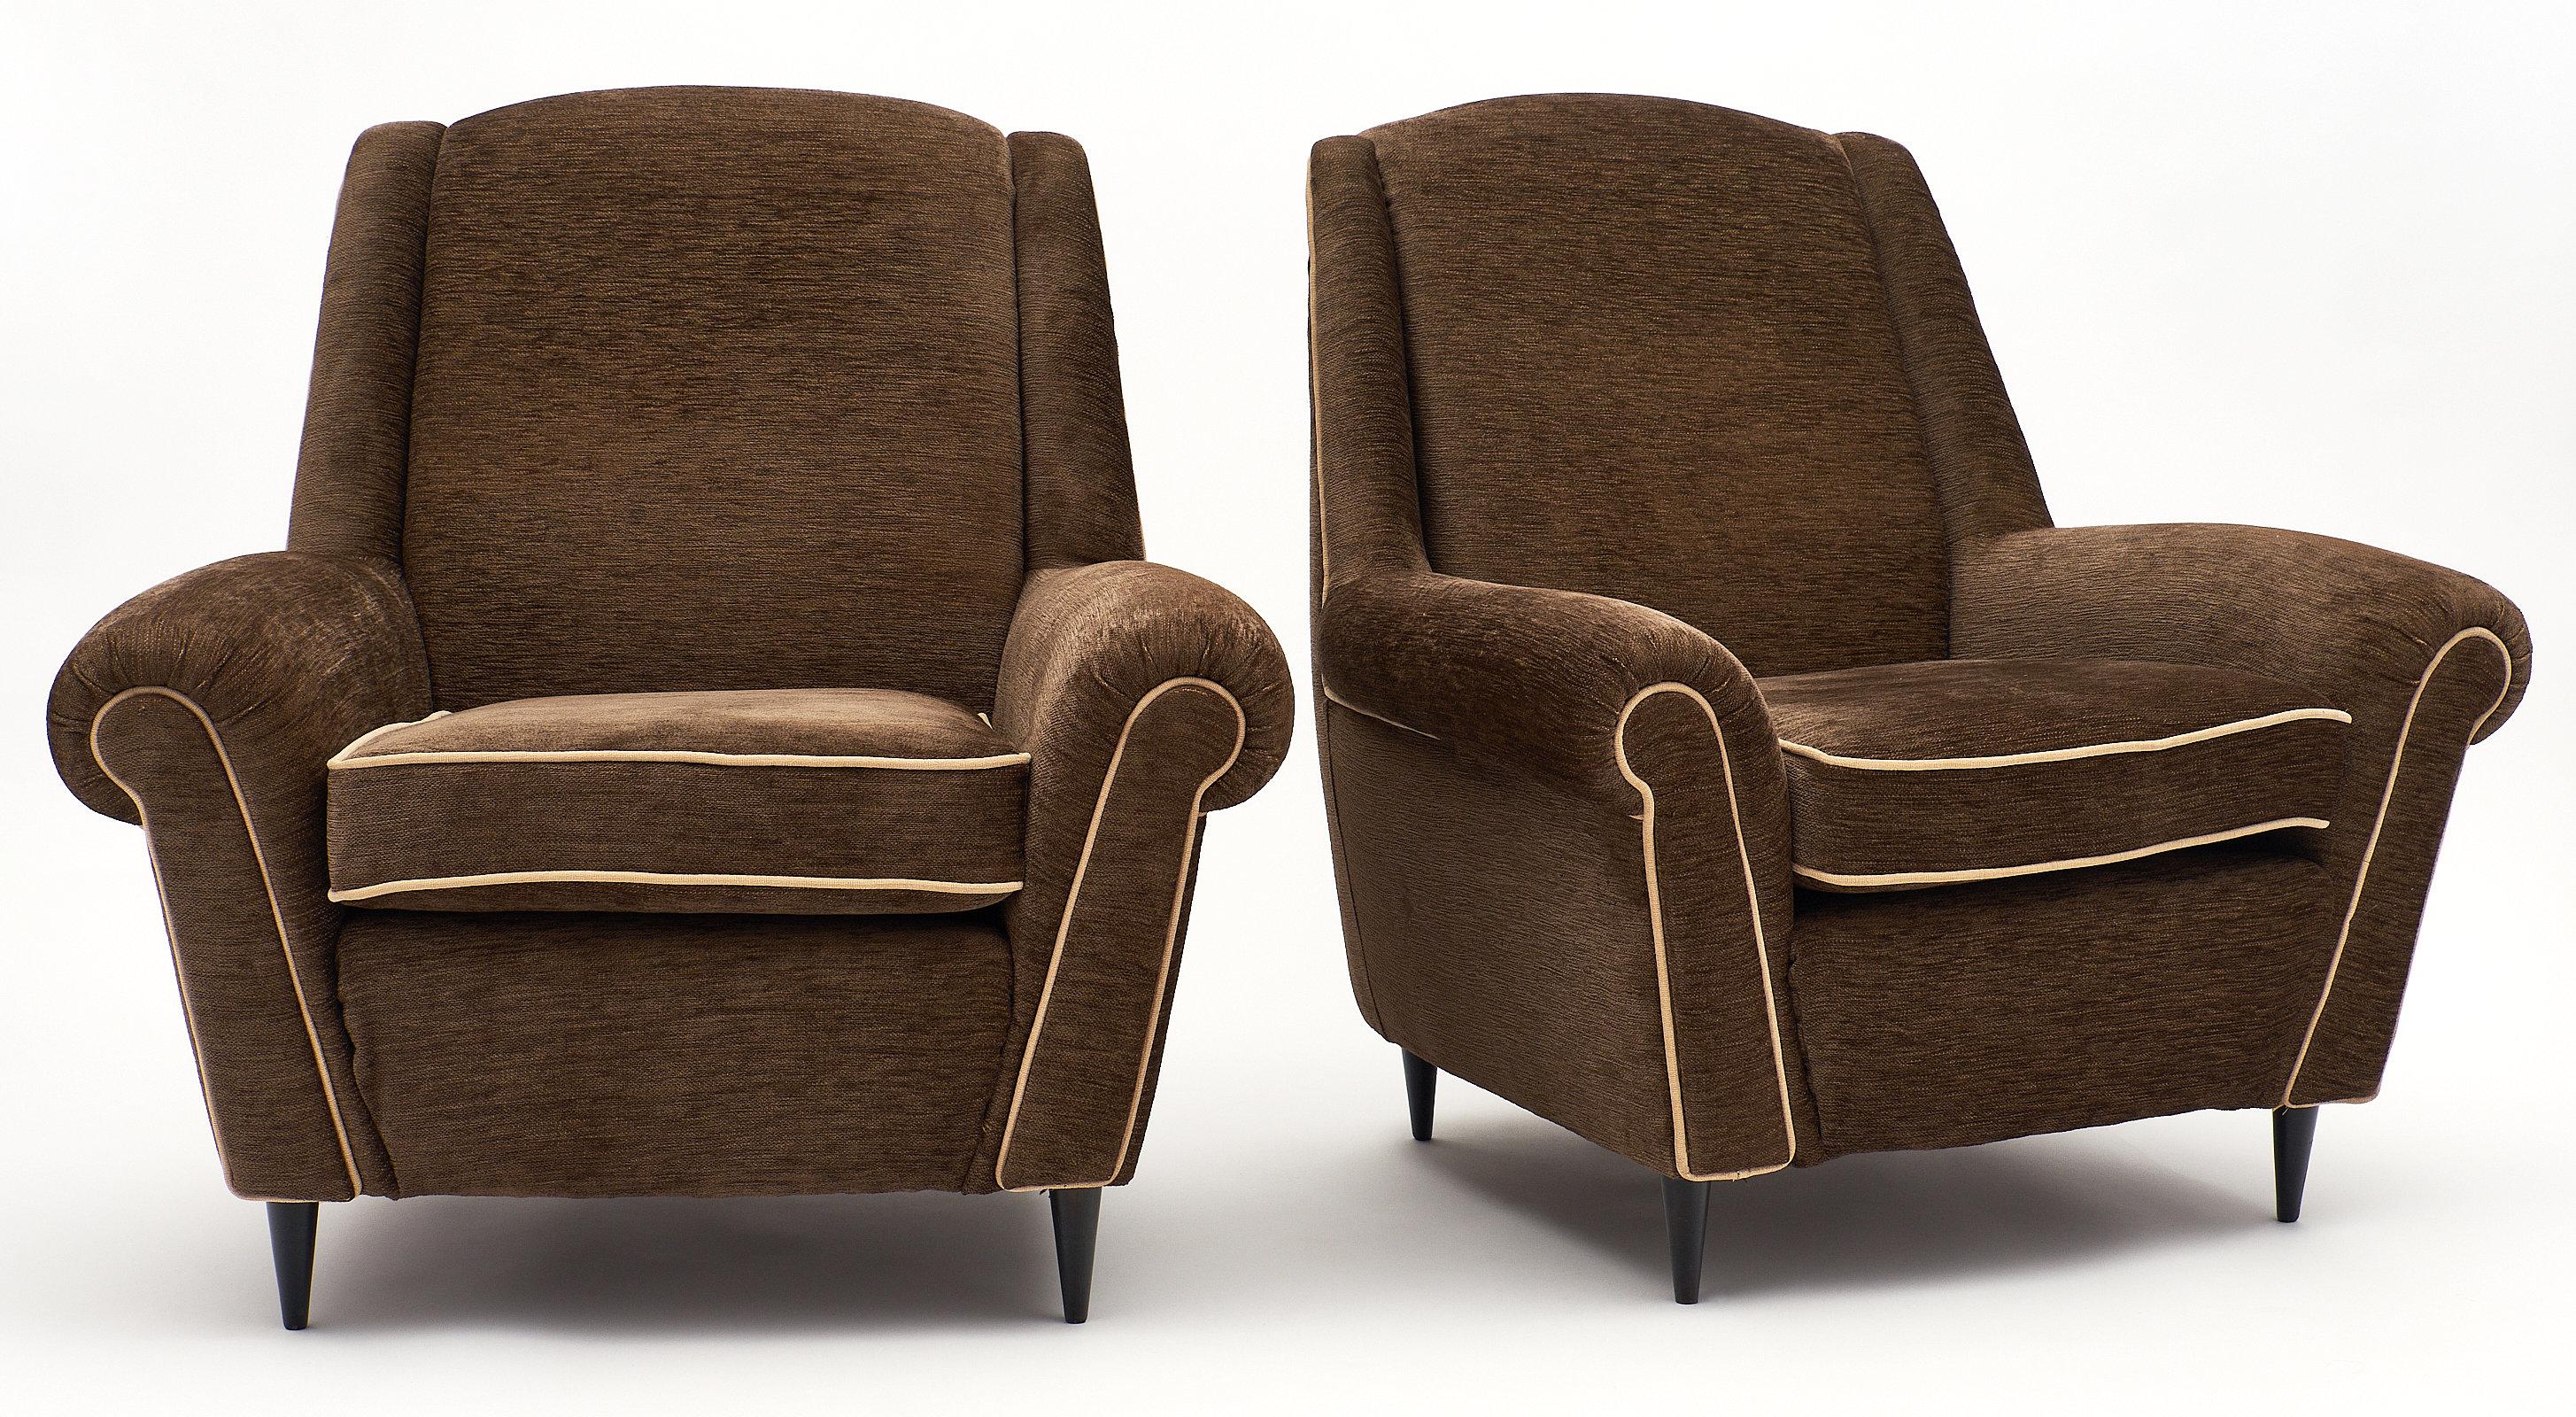 A comfortable pair of midcentury French modernist armchairs, featuring a dark top Mohair velvet mix upholstery with ivory piping. We love the tapered wooden legs, adding an elegant touch to these comfortable chairs.